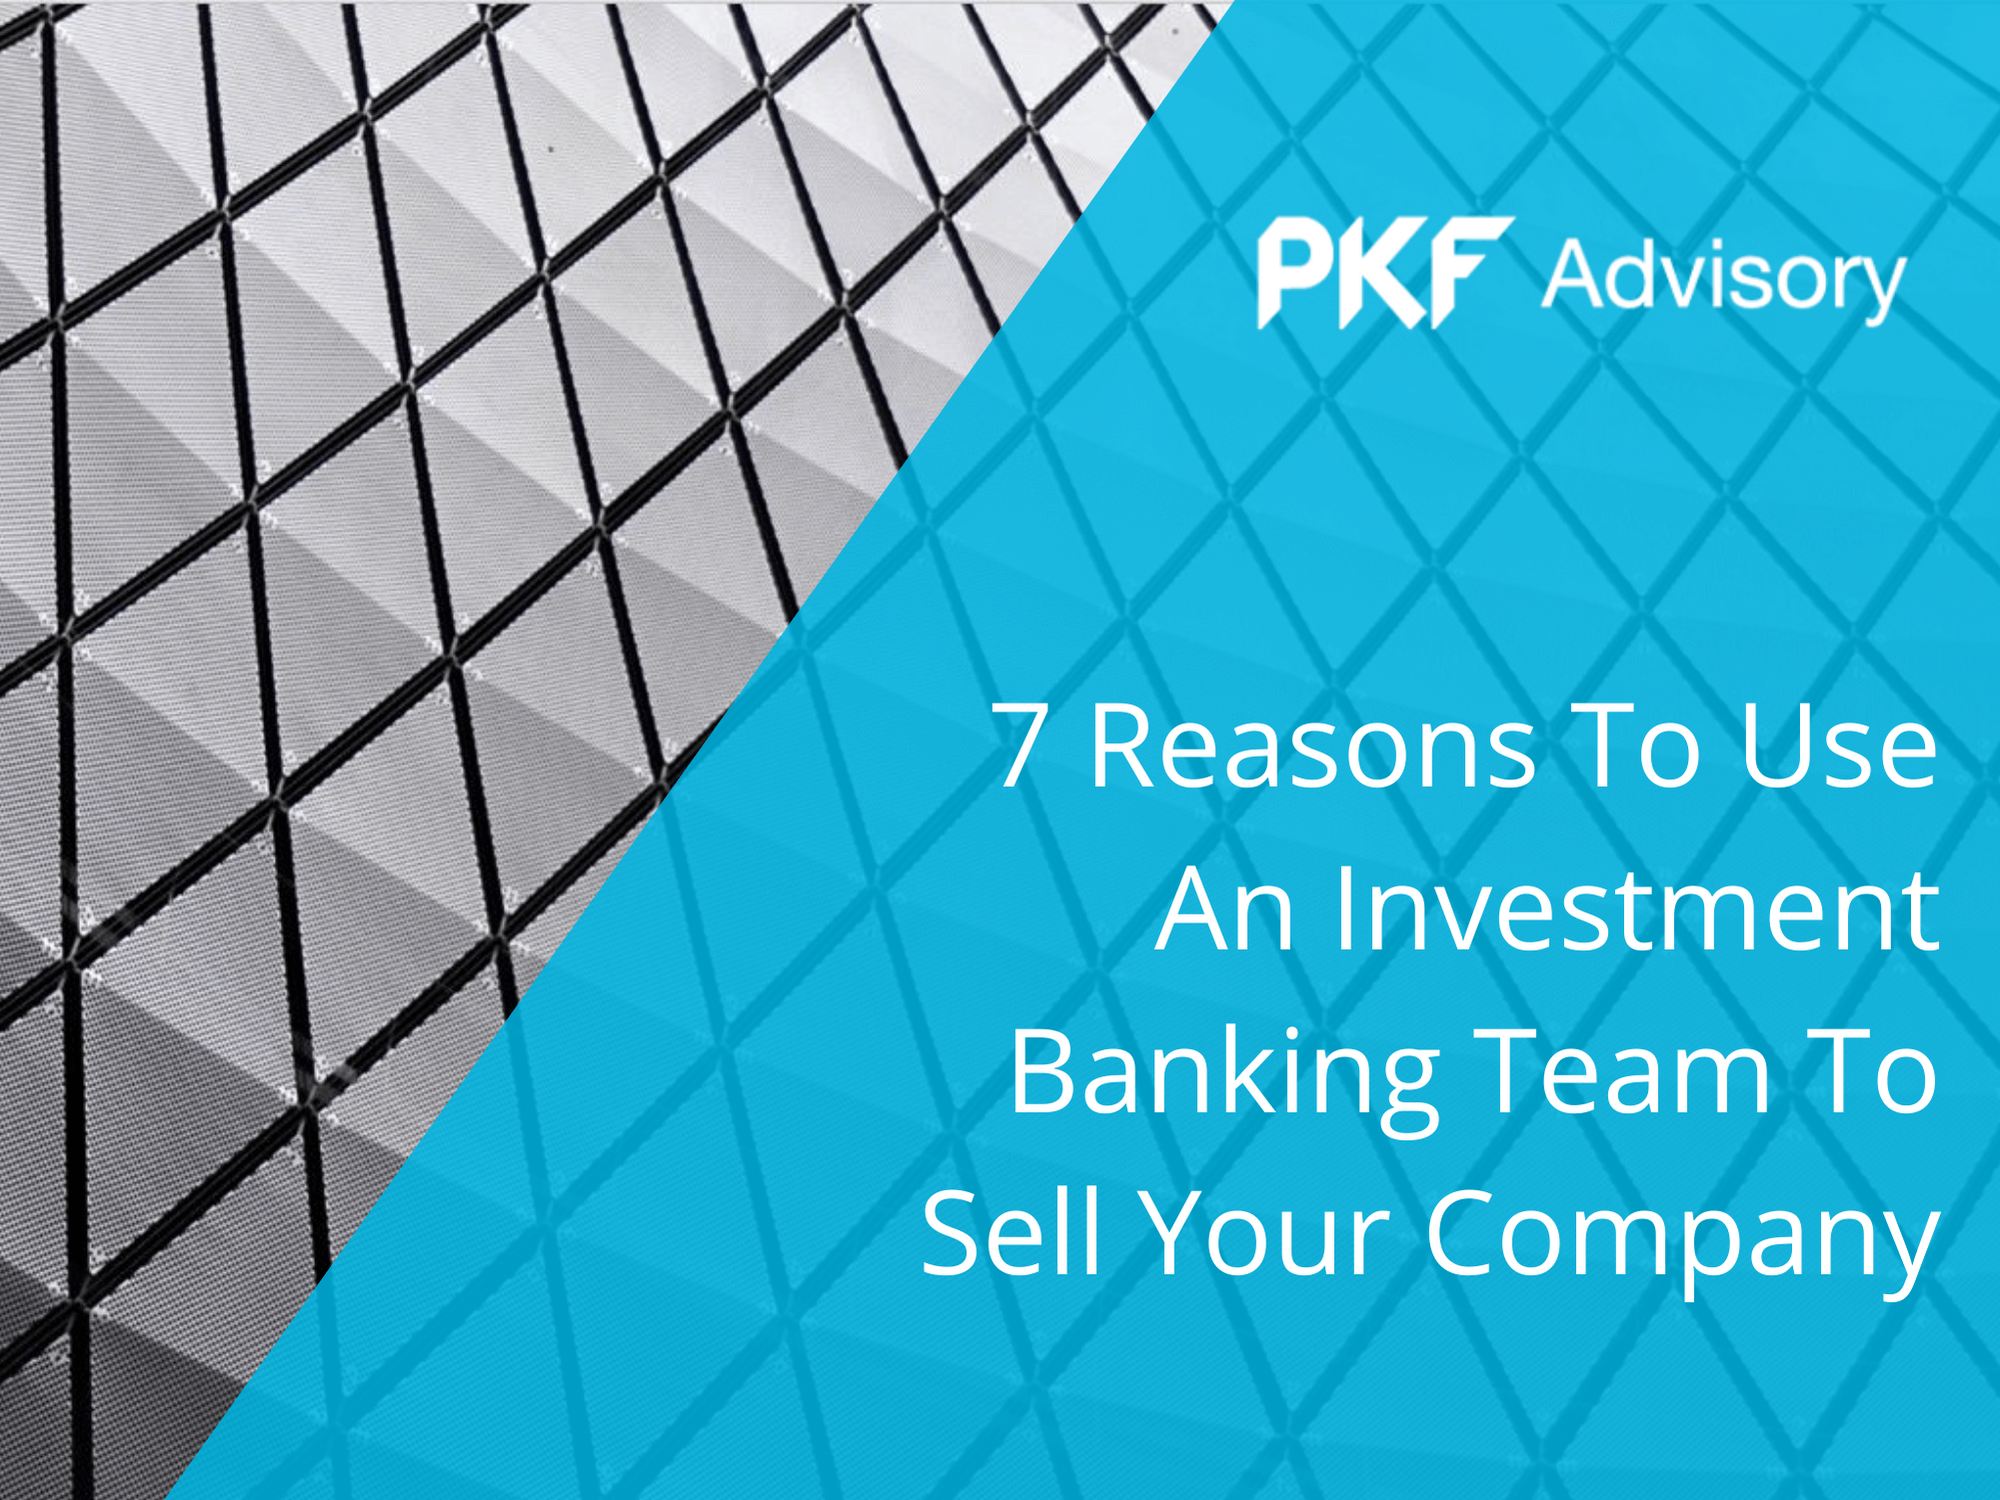 7 Reasons to use an Investment Banking Team to Sell Your Company